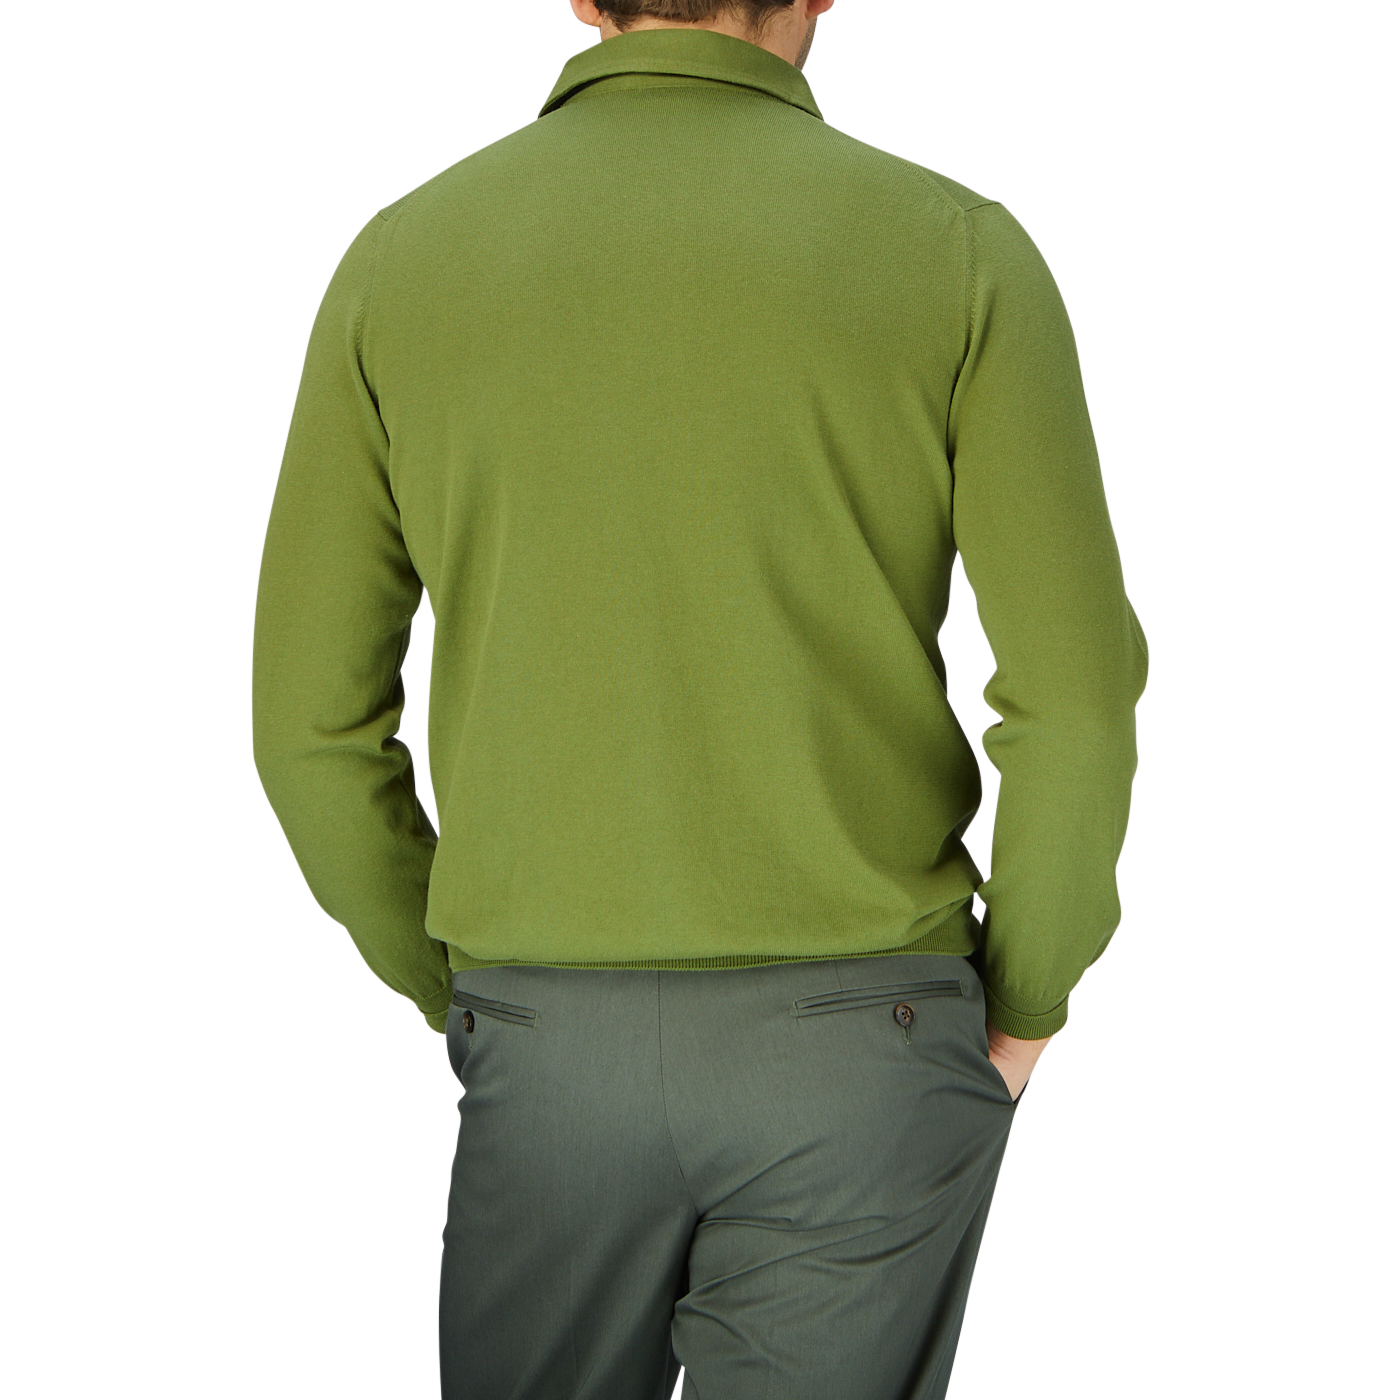 Rear view of a man wearing a Gran Sasso Green Organic Cotton LS Polo Shirt and matching trousers, standing against a light blue background.